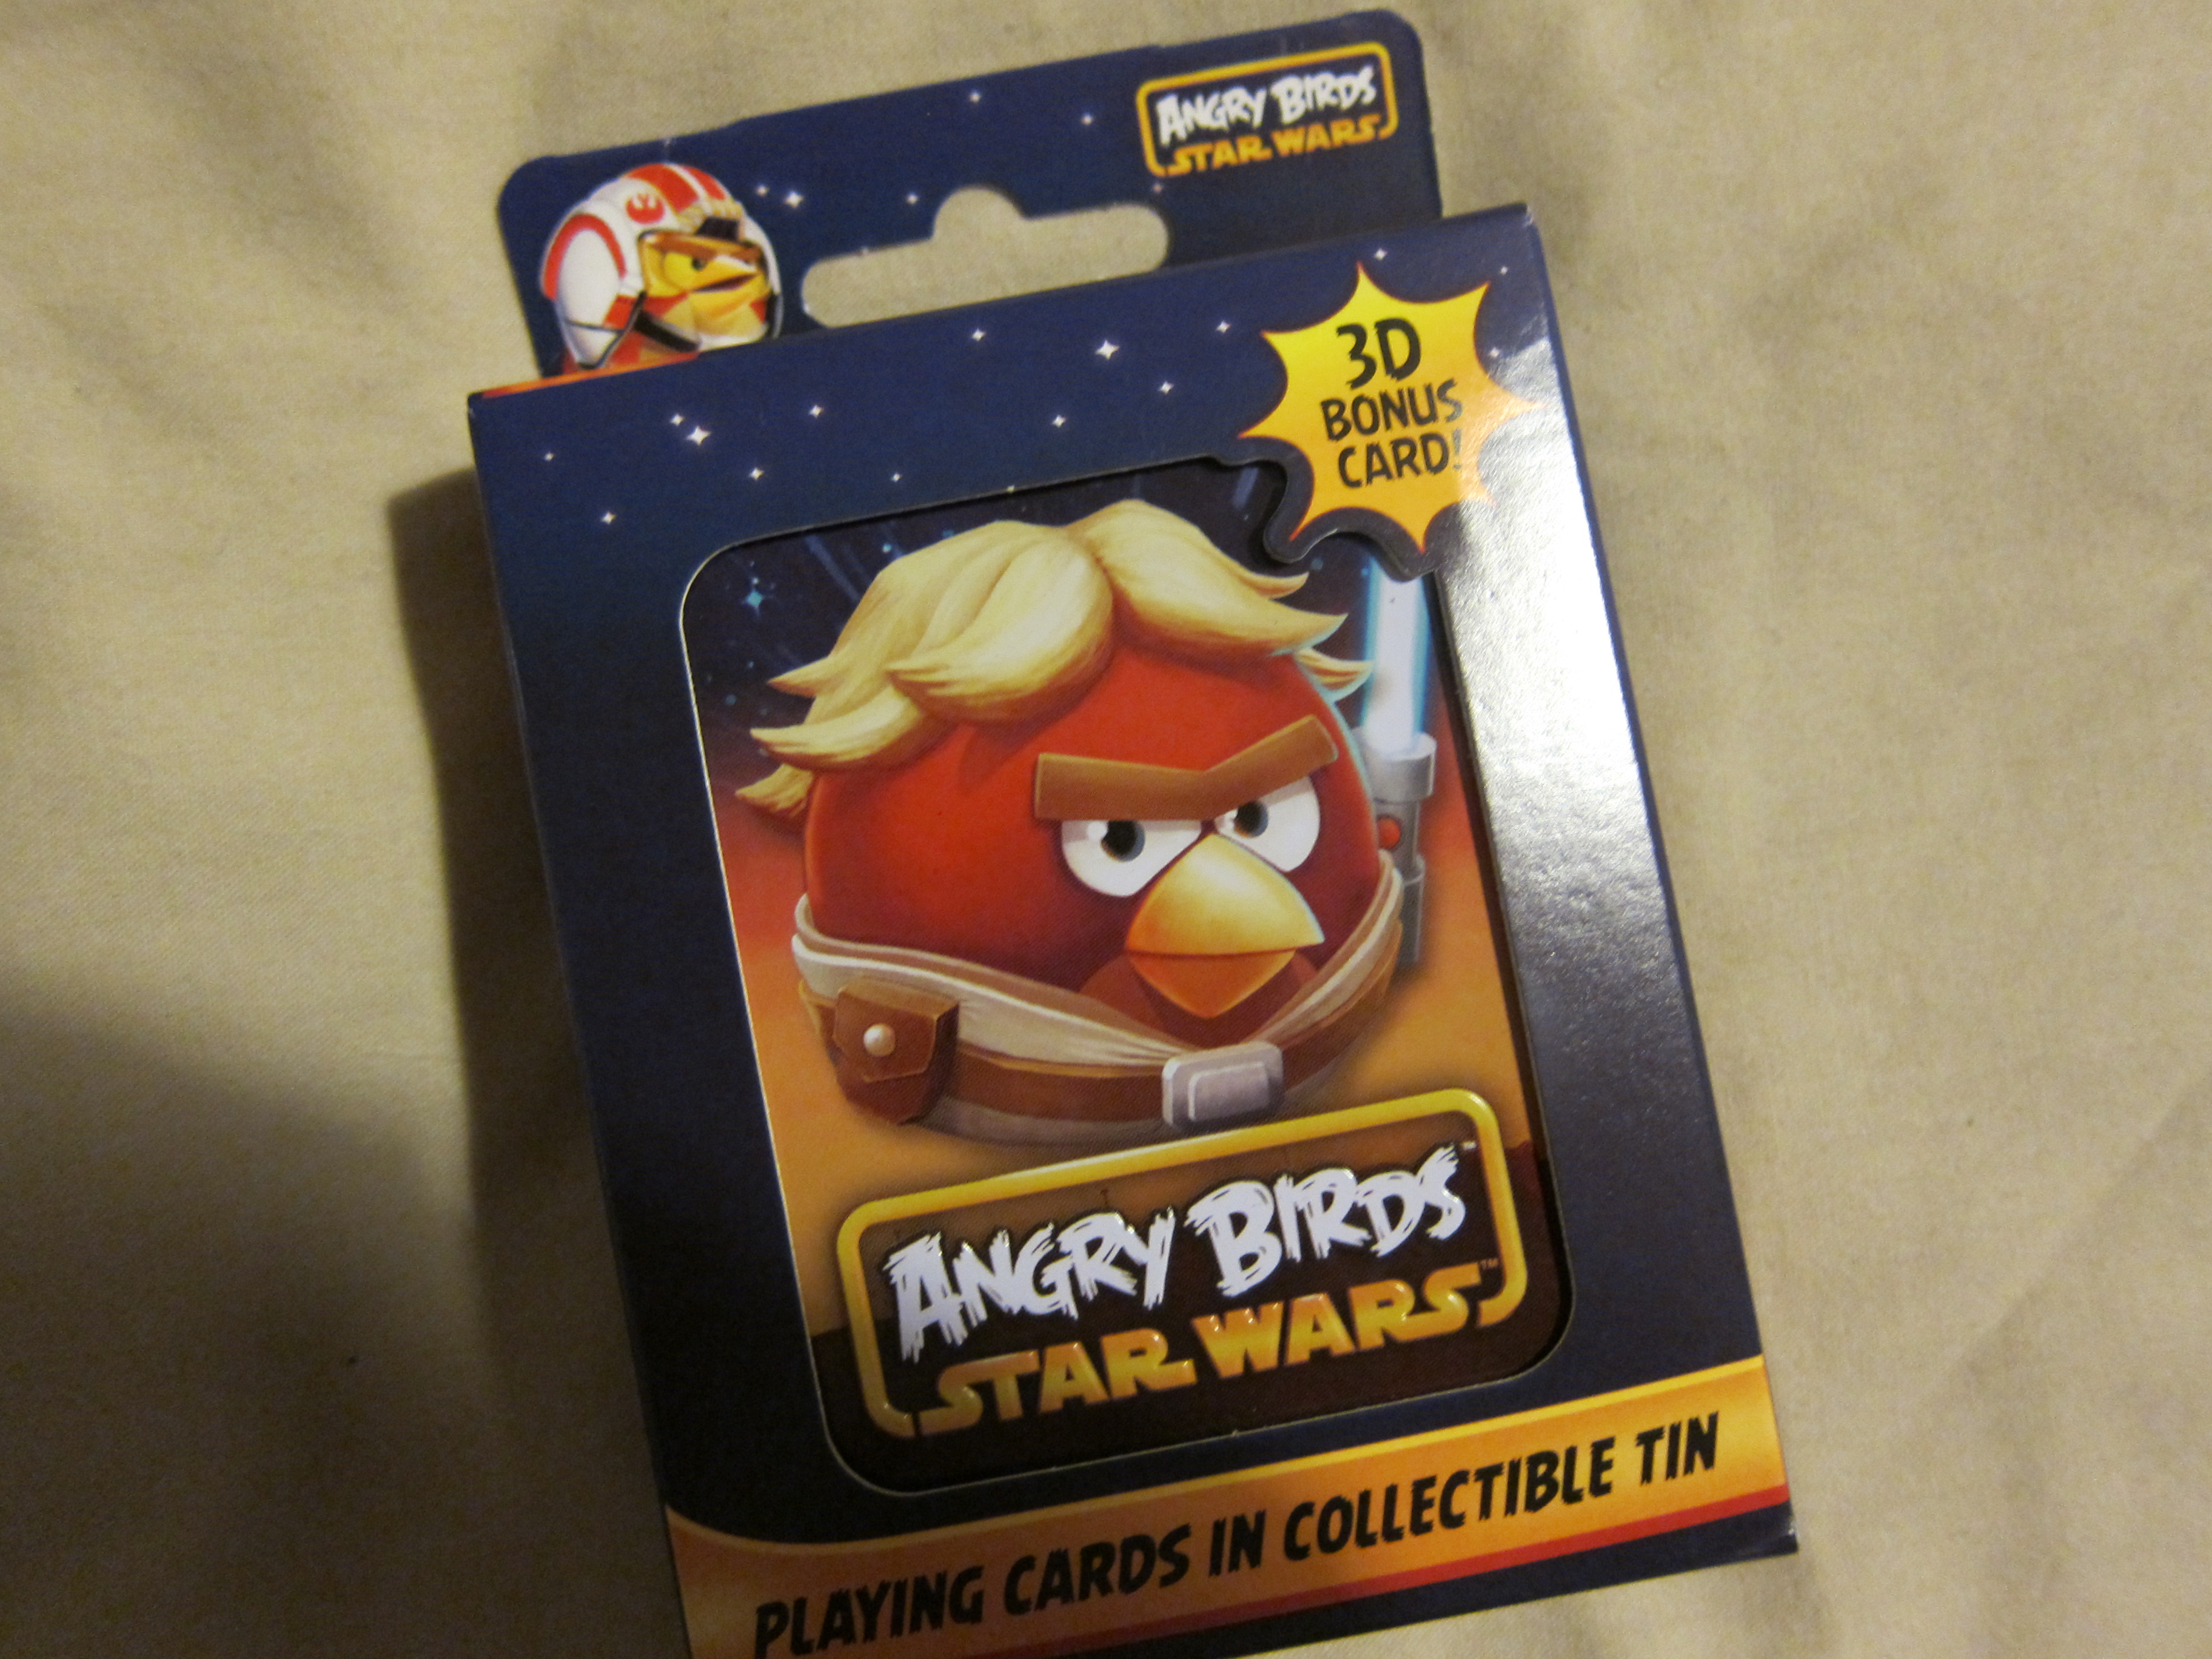 Angry Birds Star Wars Playing 3d bonus Cards In Collectable Tin set of 4 